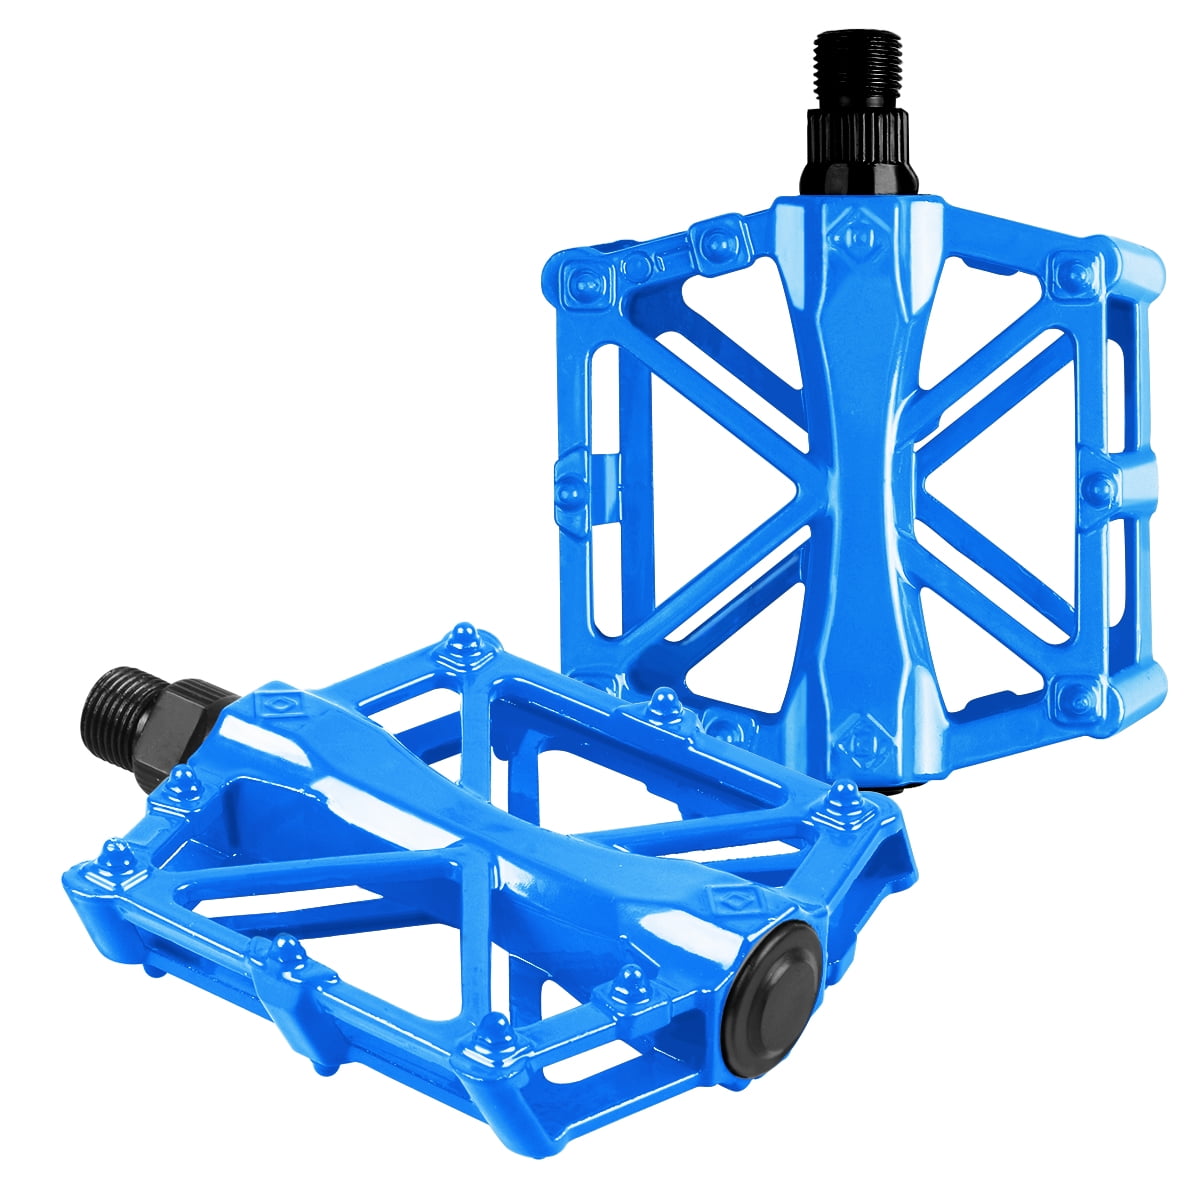 Original M.T.B Bicycle PVC Pedals 9/16" In Blue. New 